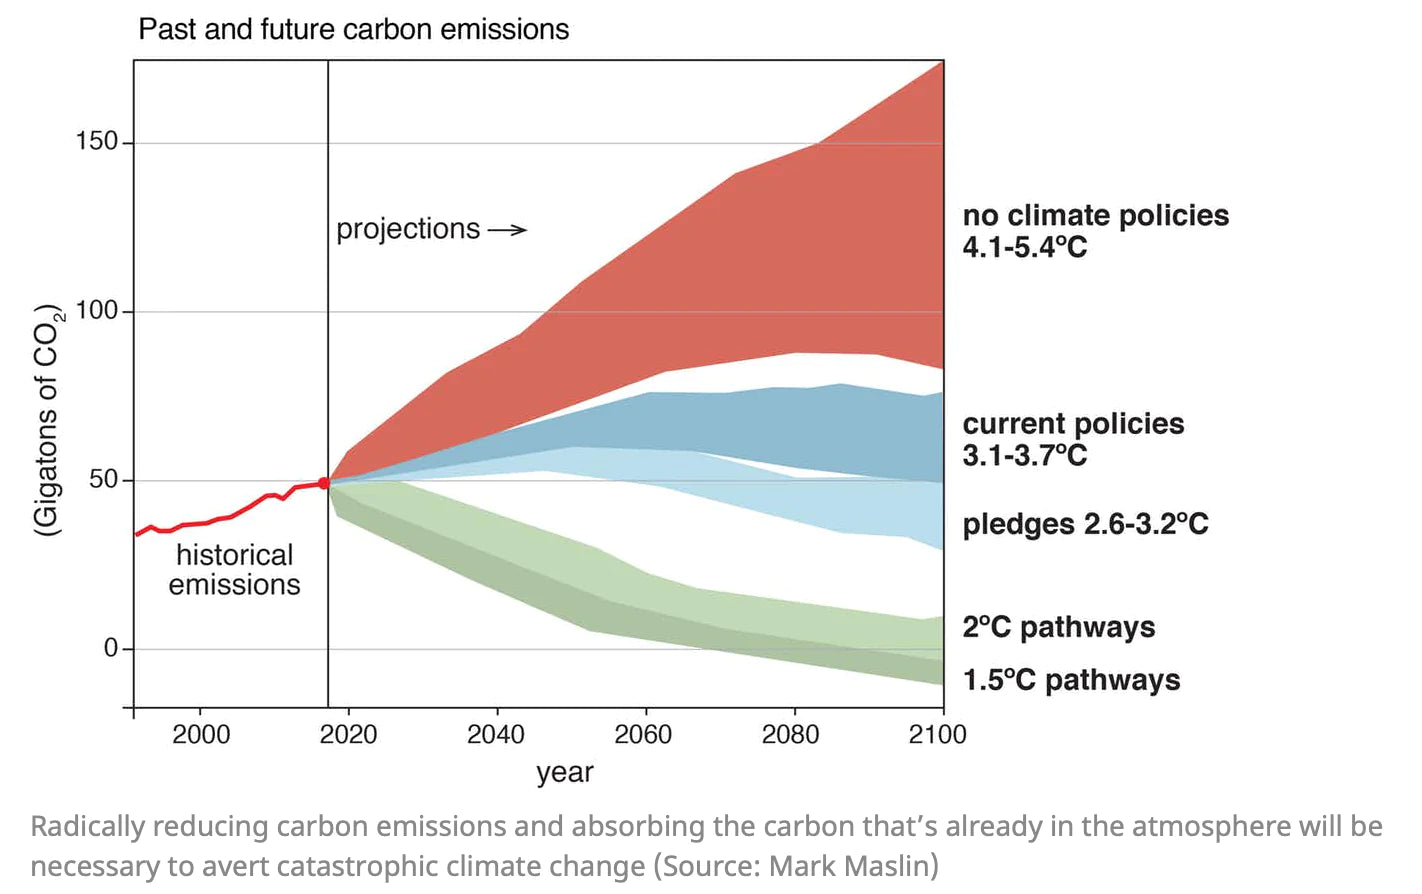 Past and future carbon emissions